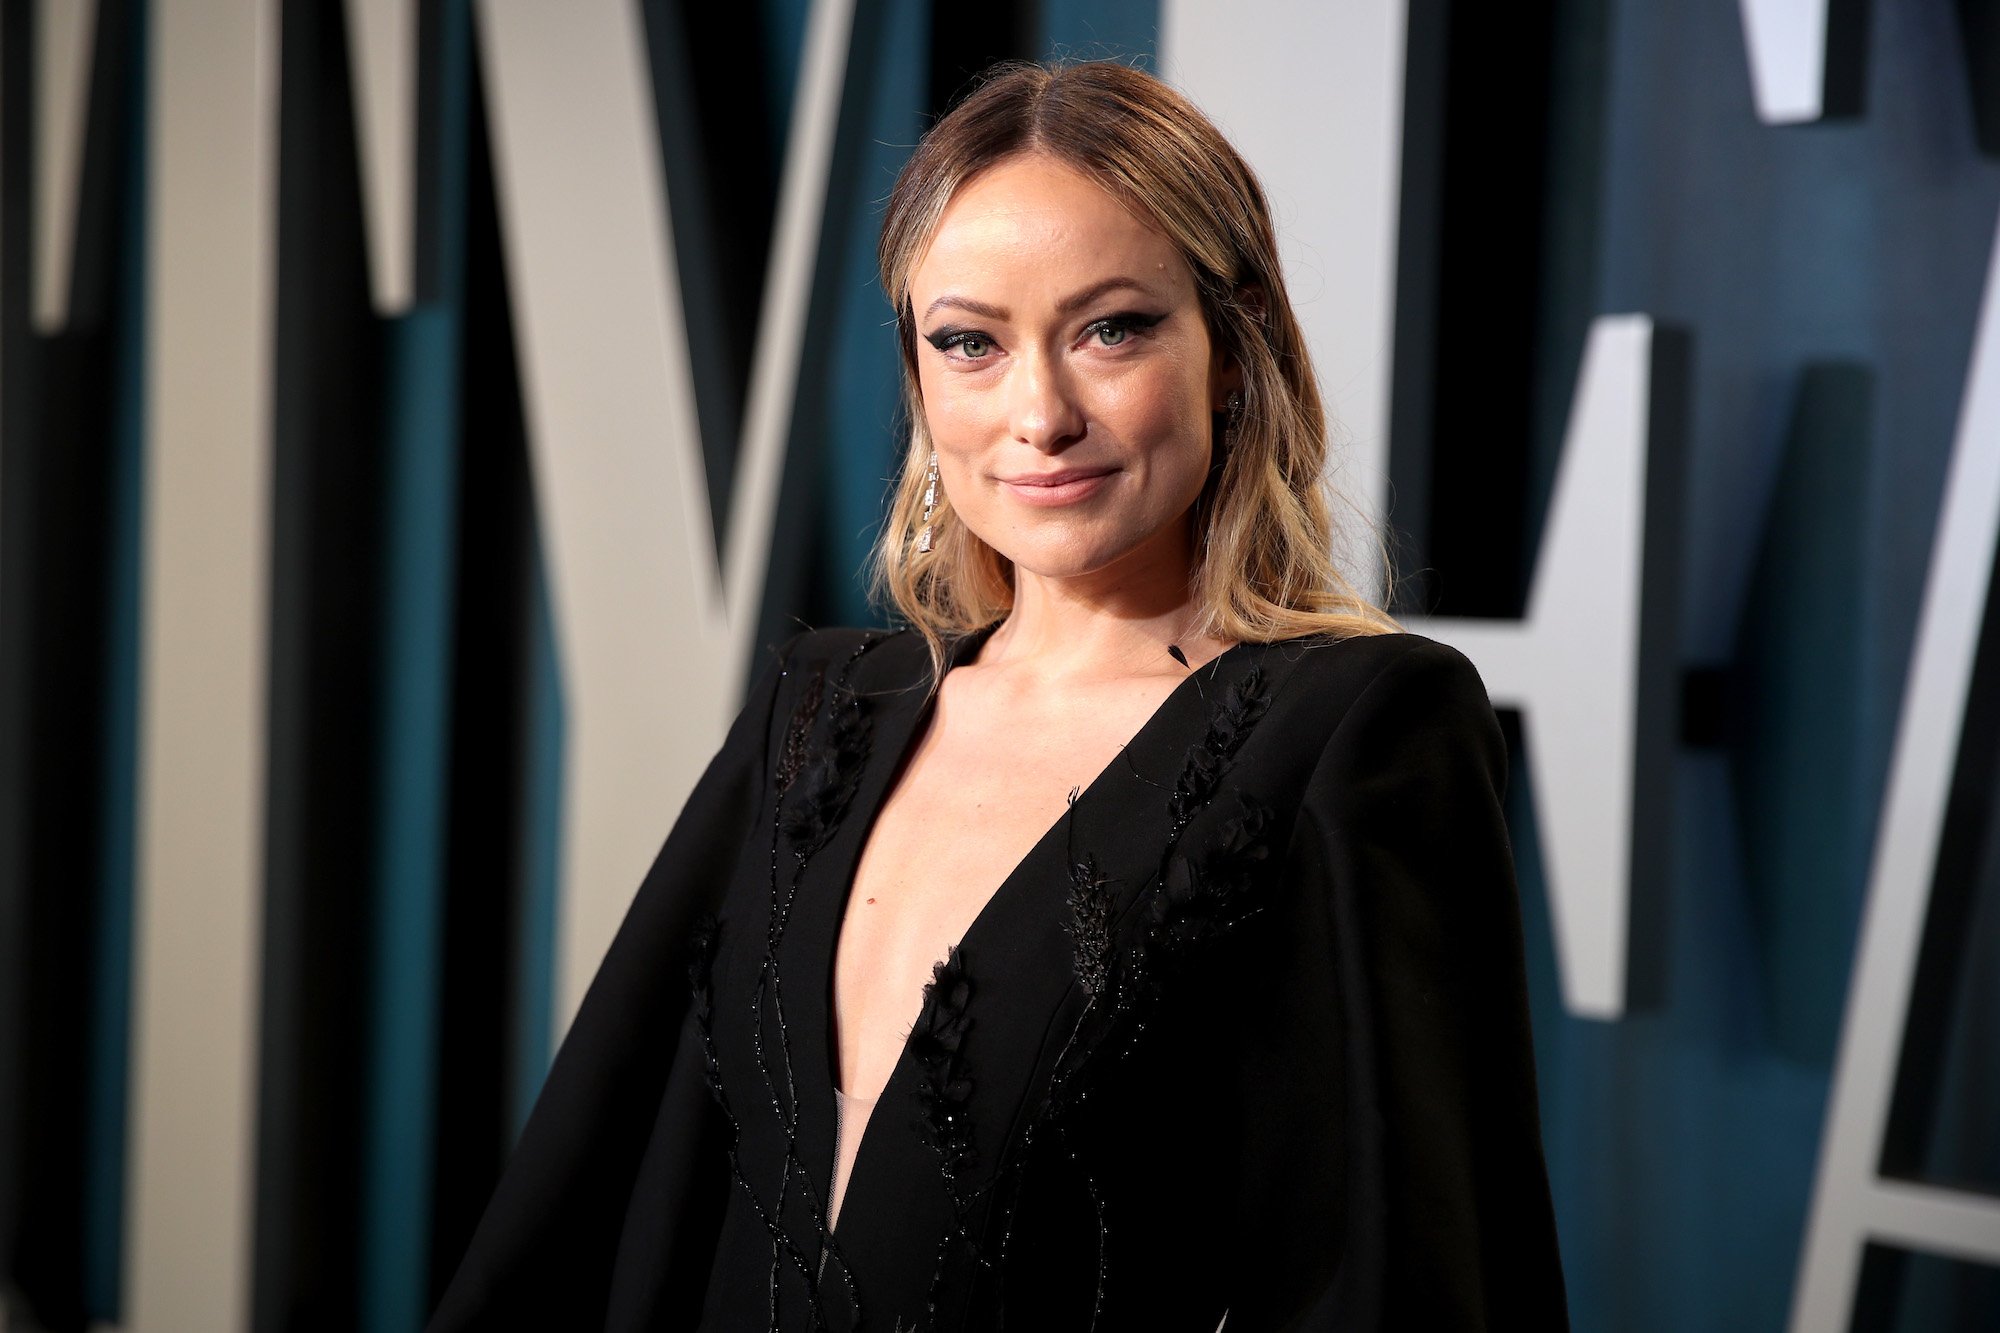 Olivia Wilde smiling in front of a blurred background